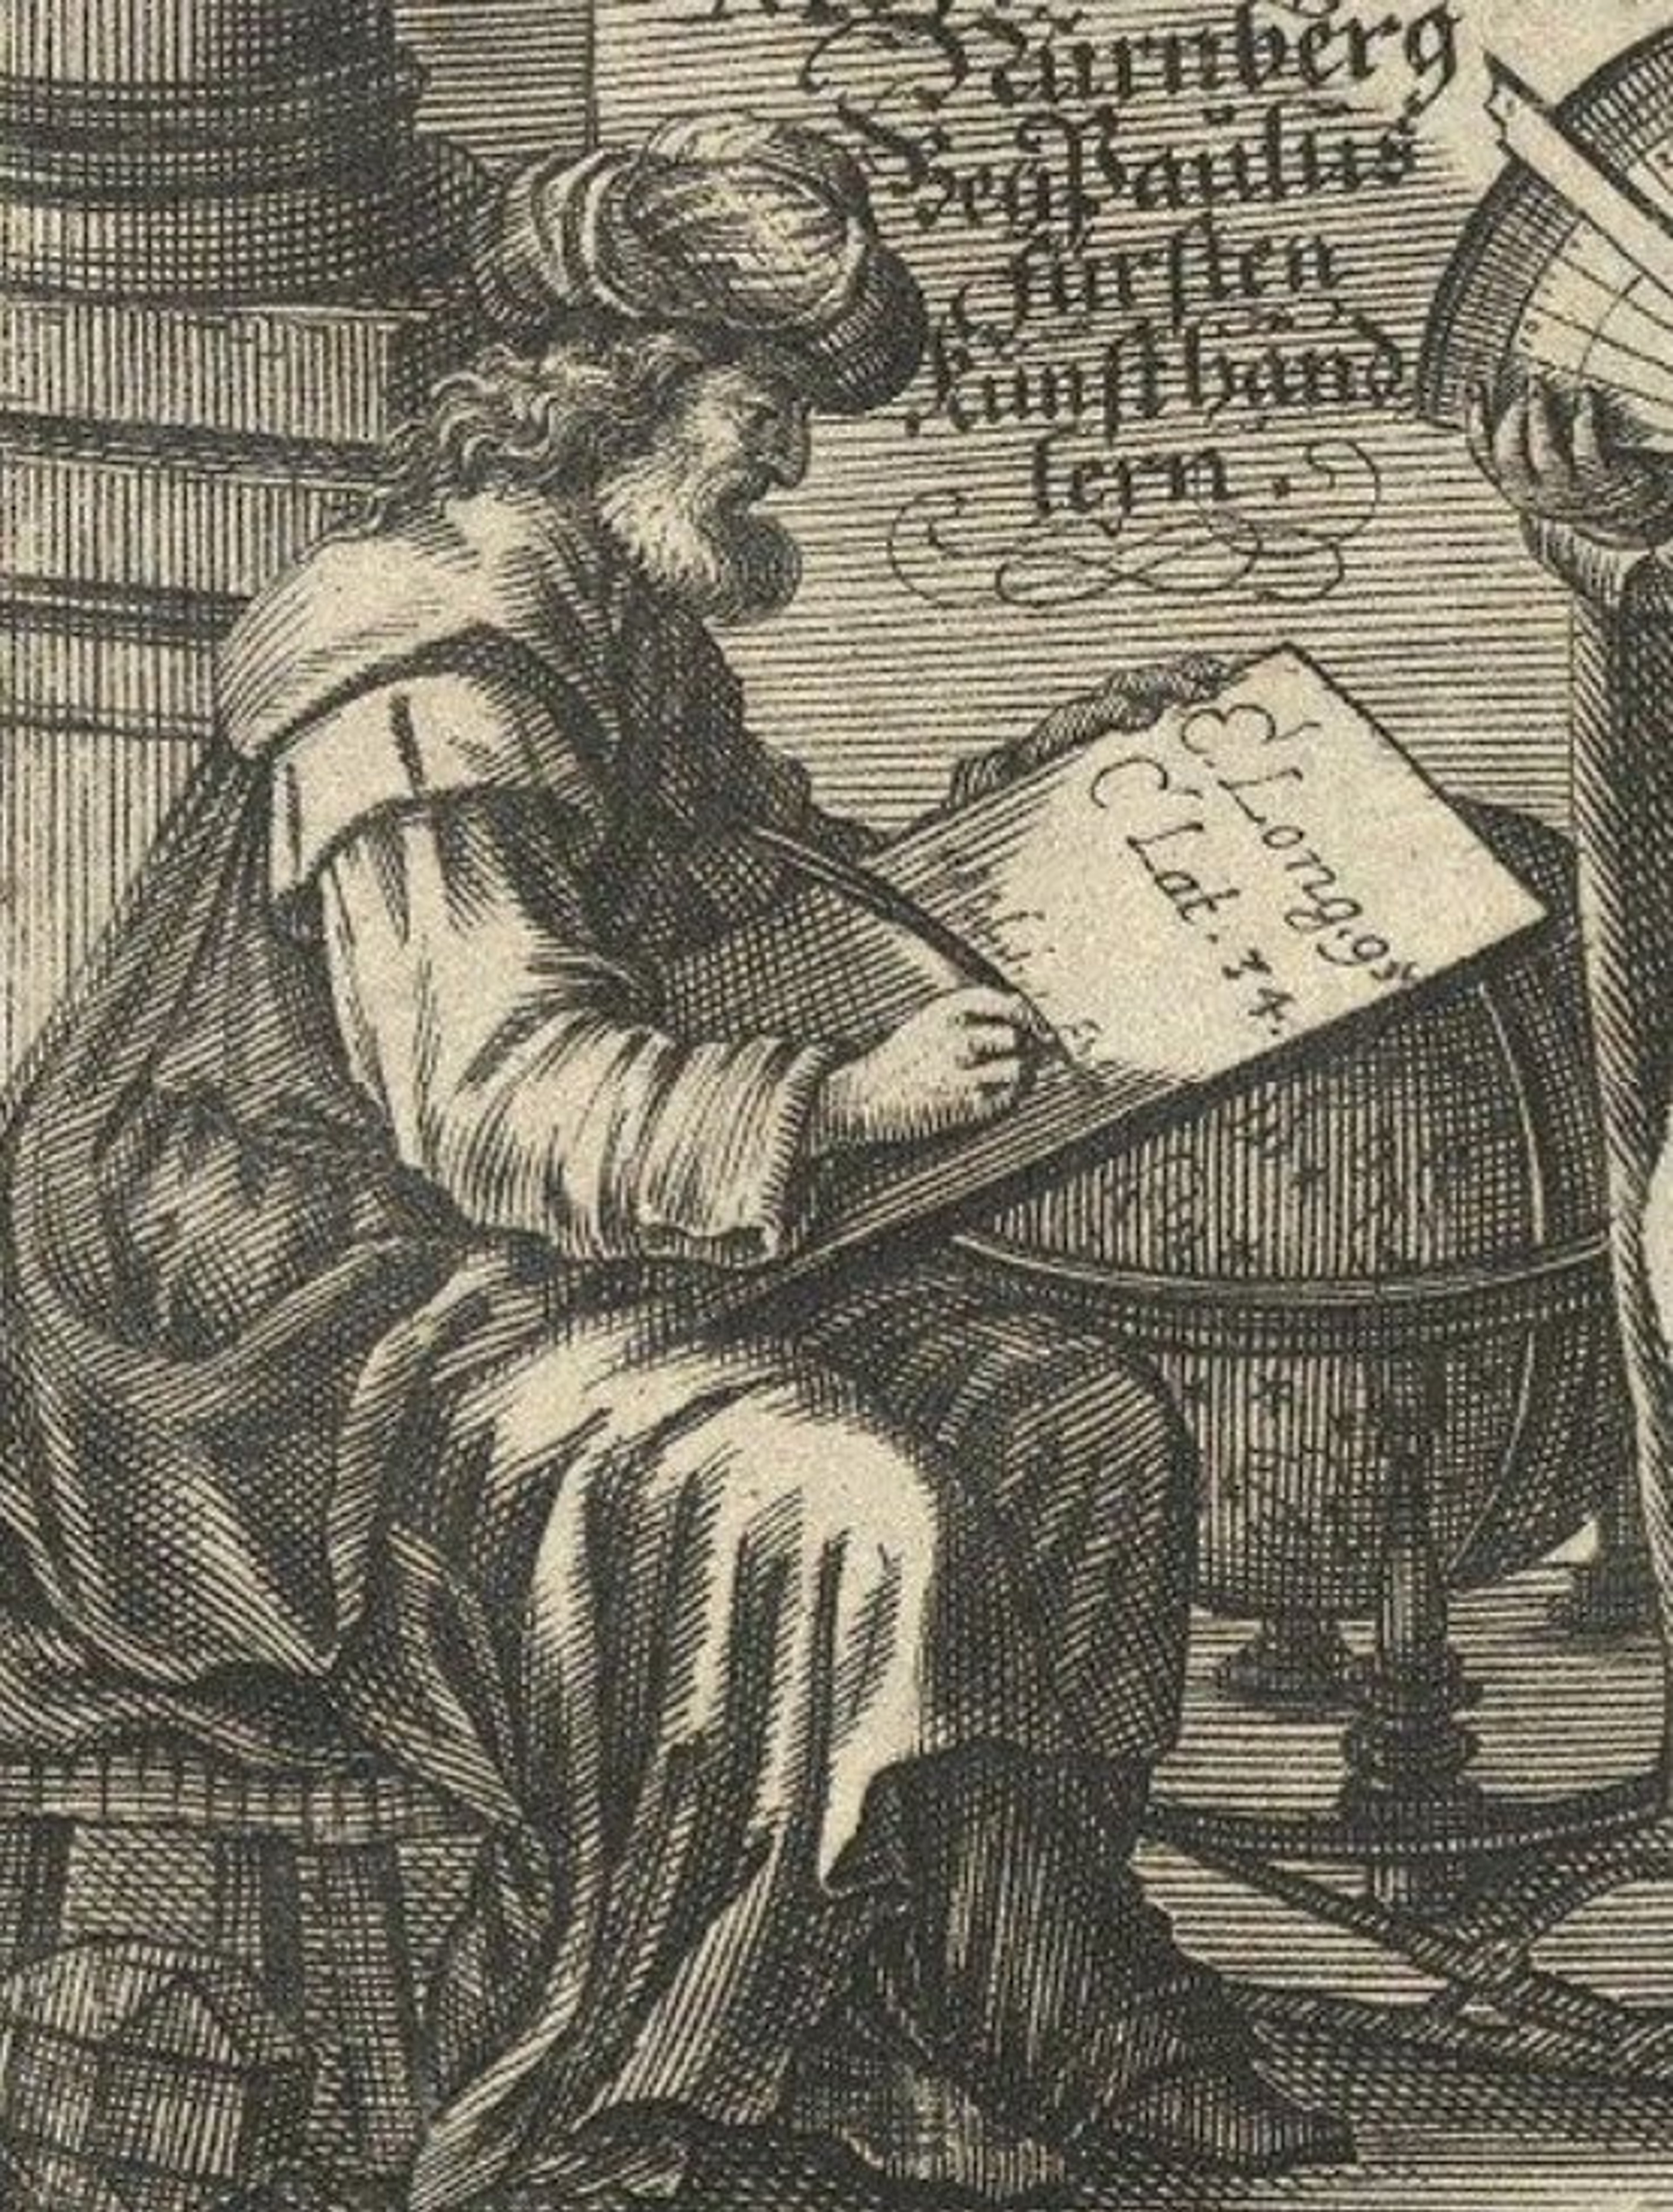 Black and white portrait of German Cartographer, Franz Ritter, who's sat on a stool and writing on parchment with a globe in the background.